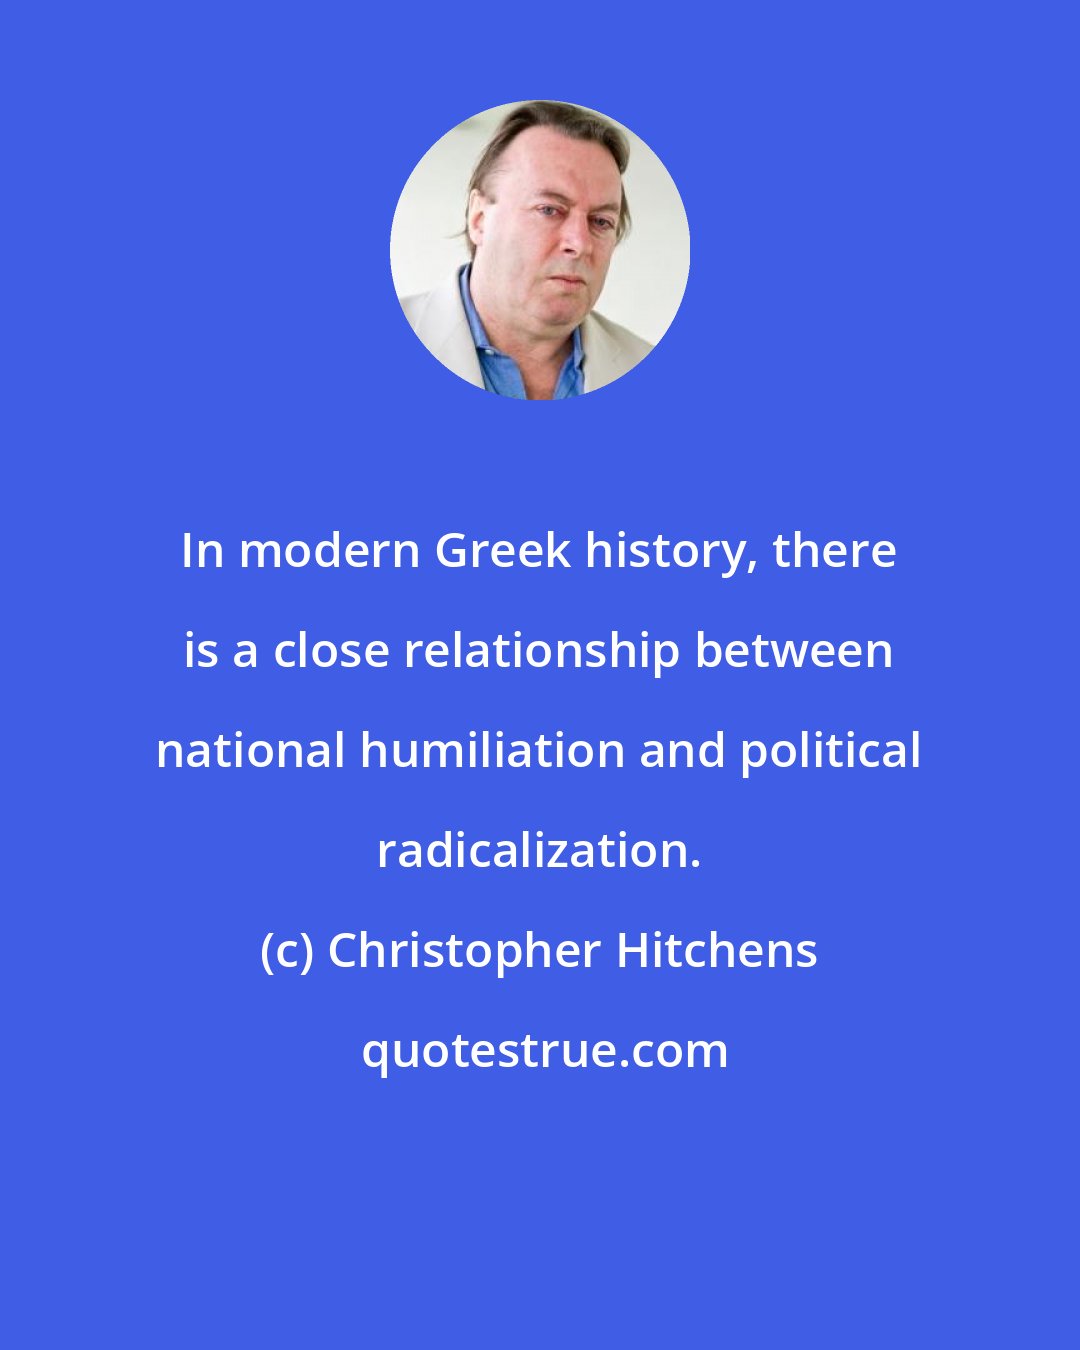 Christopher Hitchens: In modern Greek history, there is a close relationship between national humiliation and political radicalization.